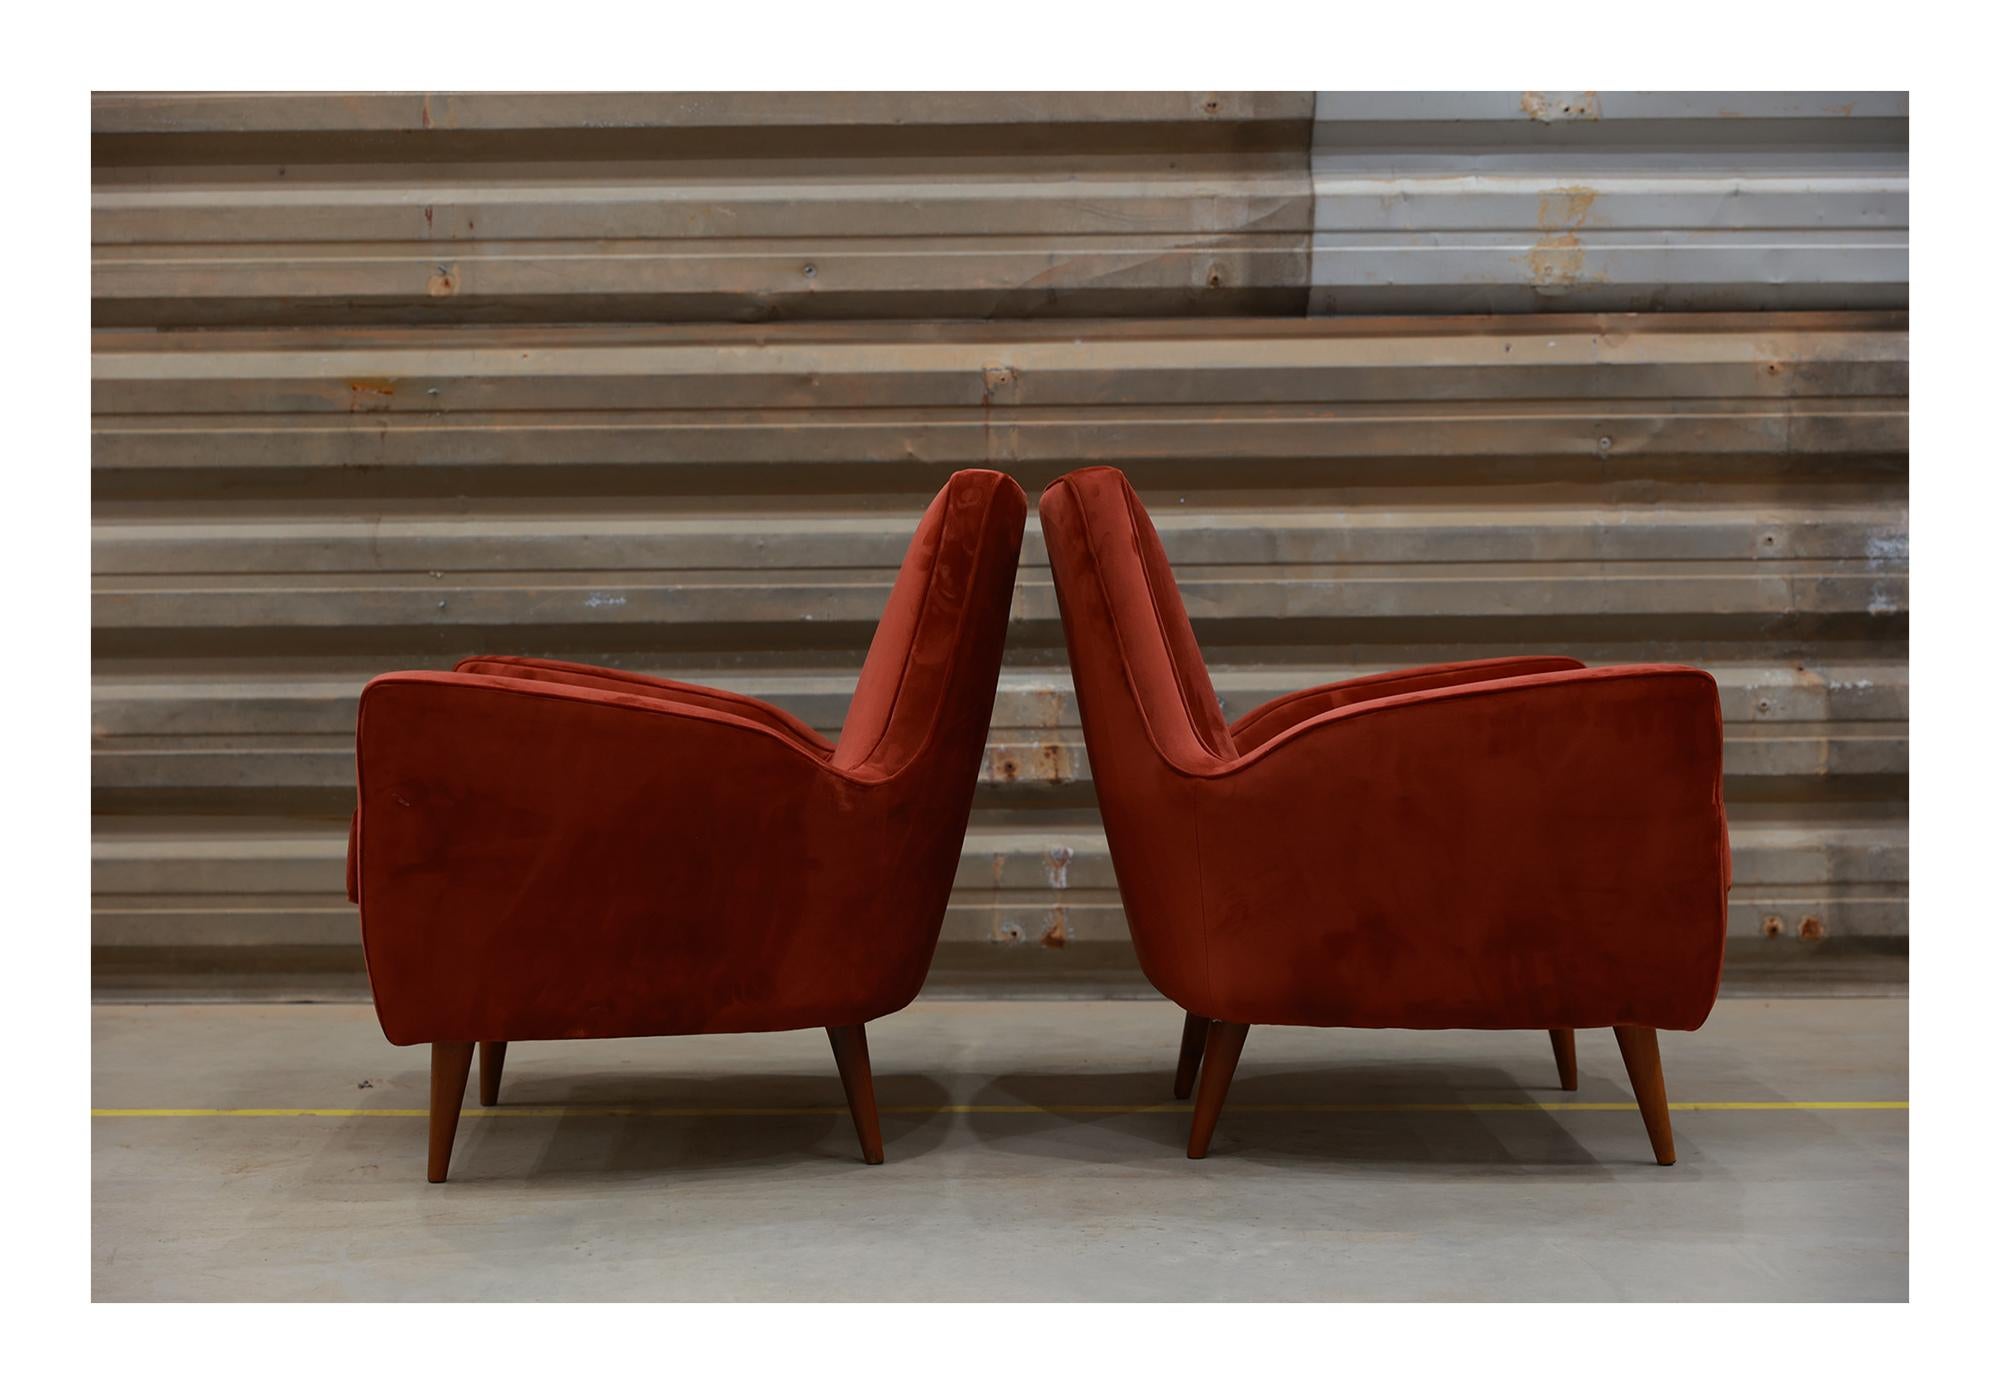 South American Brazilian Modern Armchair Set in Hardwood & Burgundy Fabric by Forma, 1950’s  For Sale